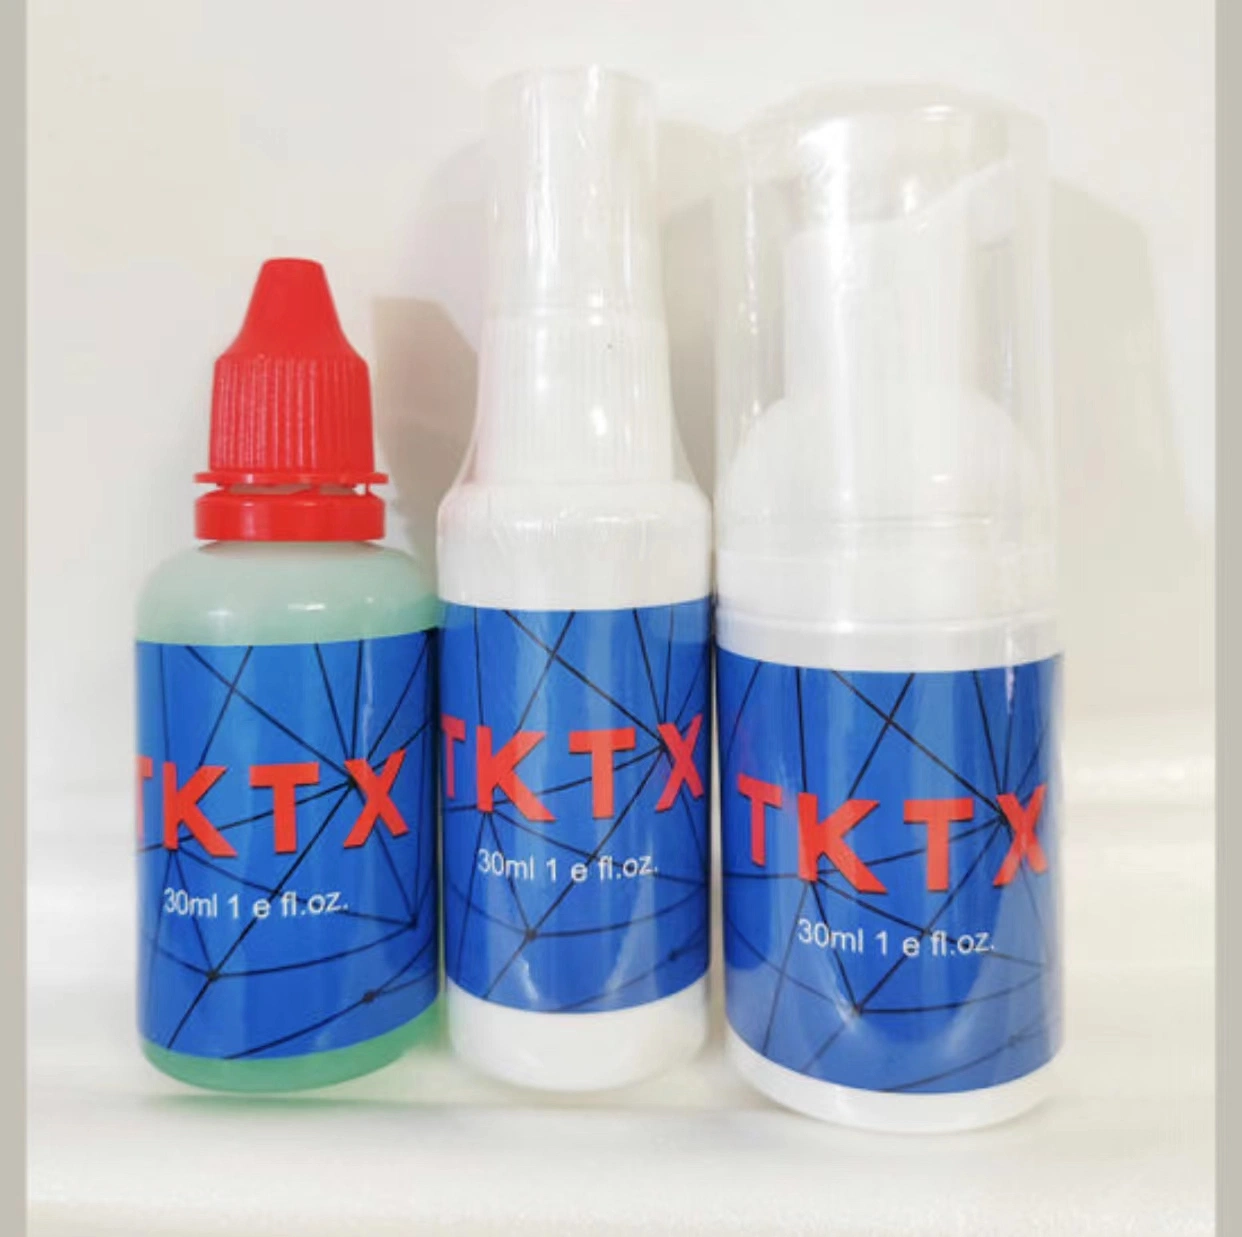 Tktx Tattoo Anesthetic Microblading Permanent Makeup Numbing Foam Numb Spray Tattoo Supply